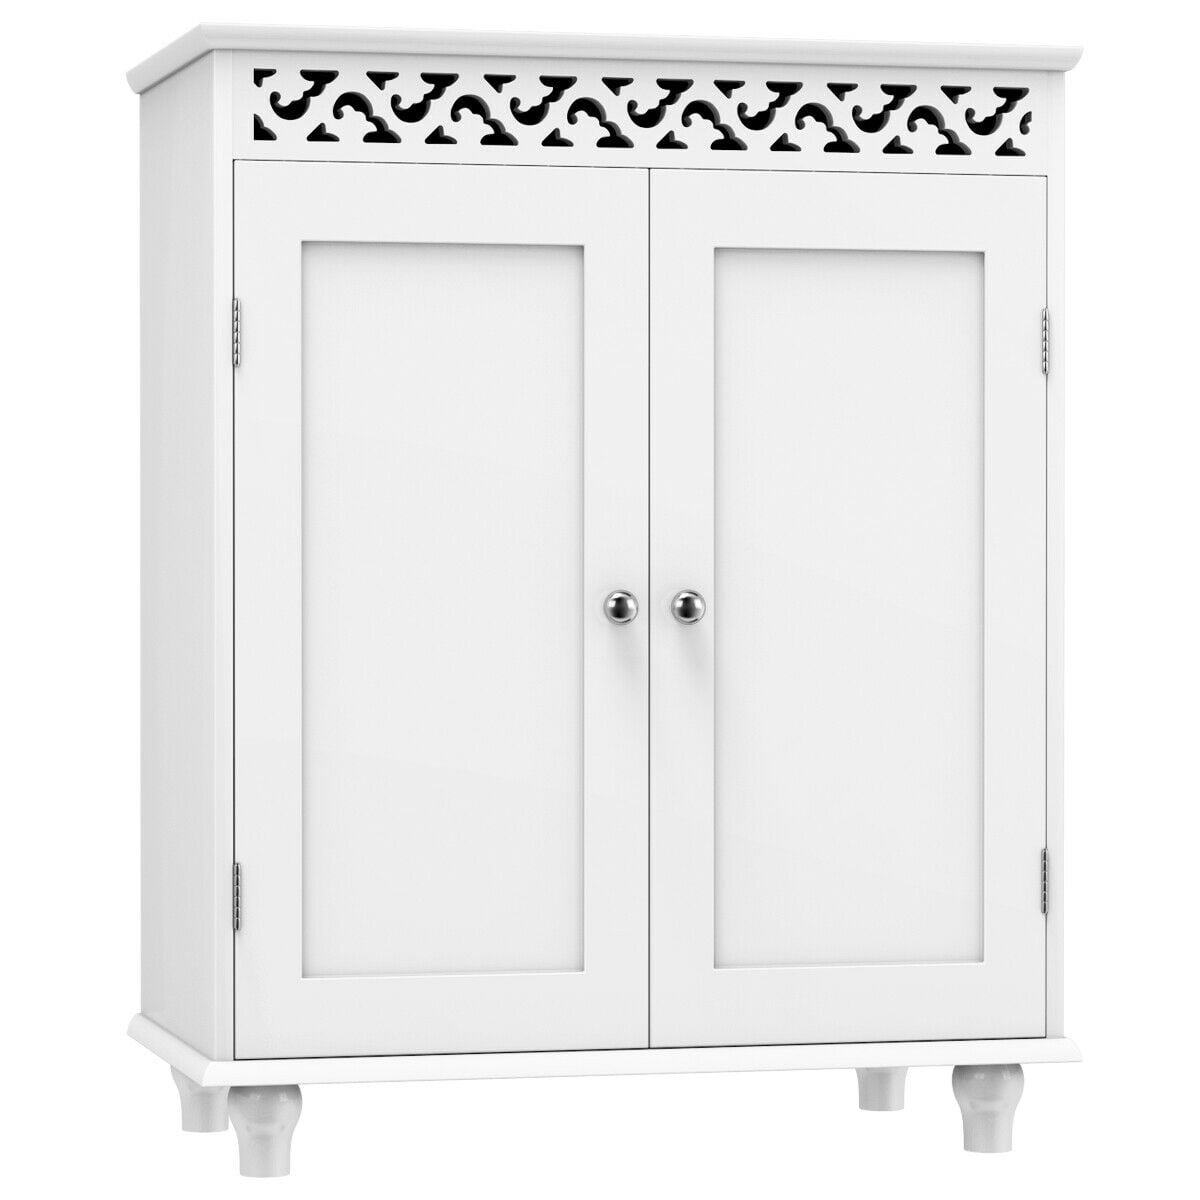 White Yaheetech Bathroom Wall Cabinets/Cupboard with Double Door and Adjustable Shelf Kitchen/Toilet Storage/Organiser Unit